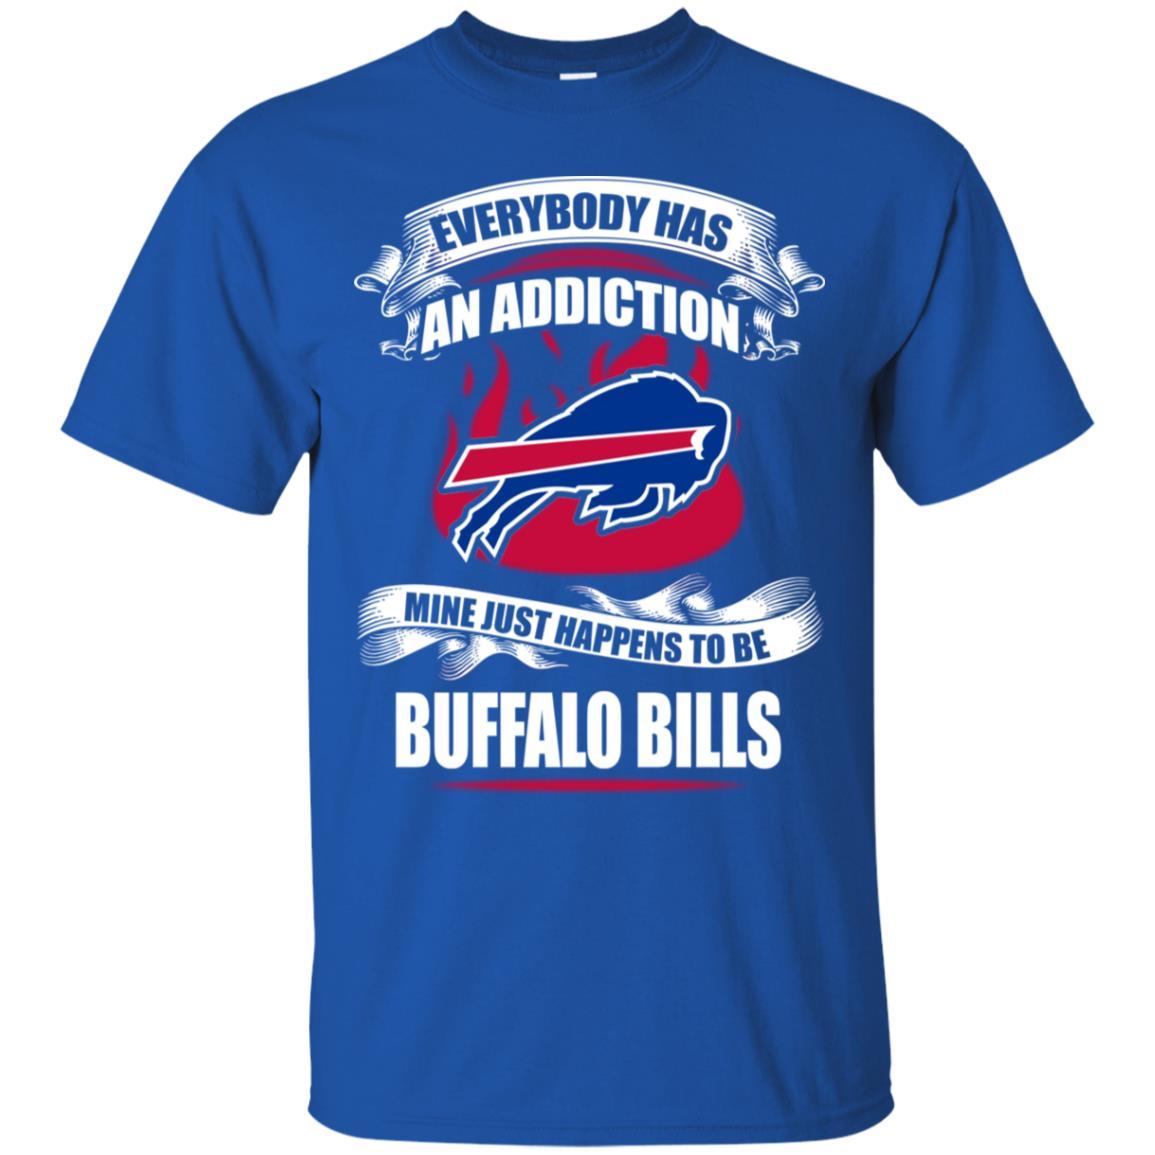 BUFFALO-BILLS-Has-An-Addiction-Mine-Just-Happens-To-Be-T-SHIRT-FOR-FAN-2023